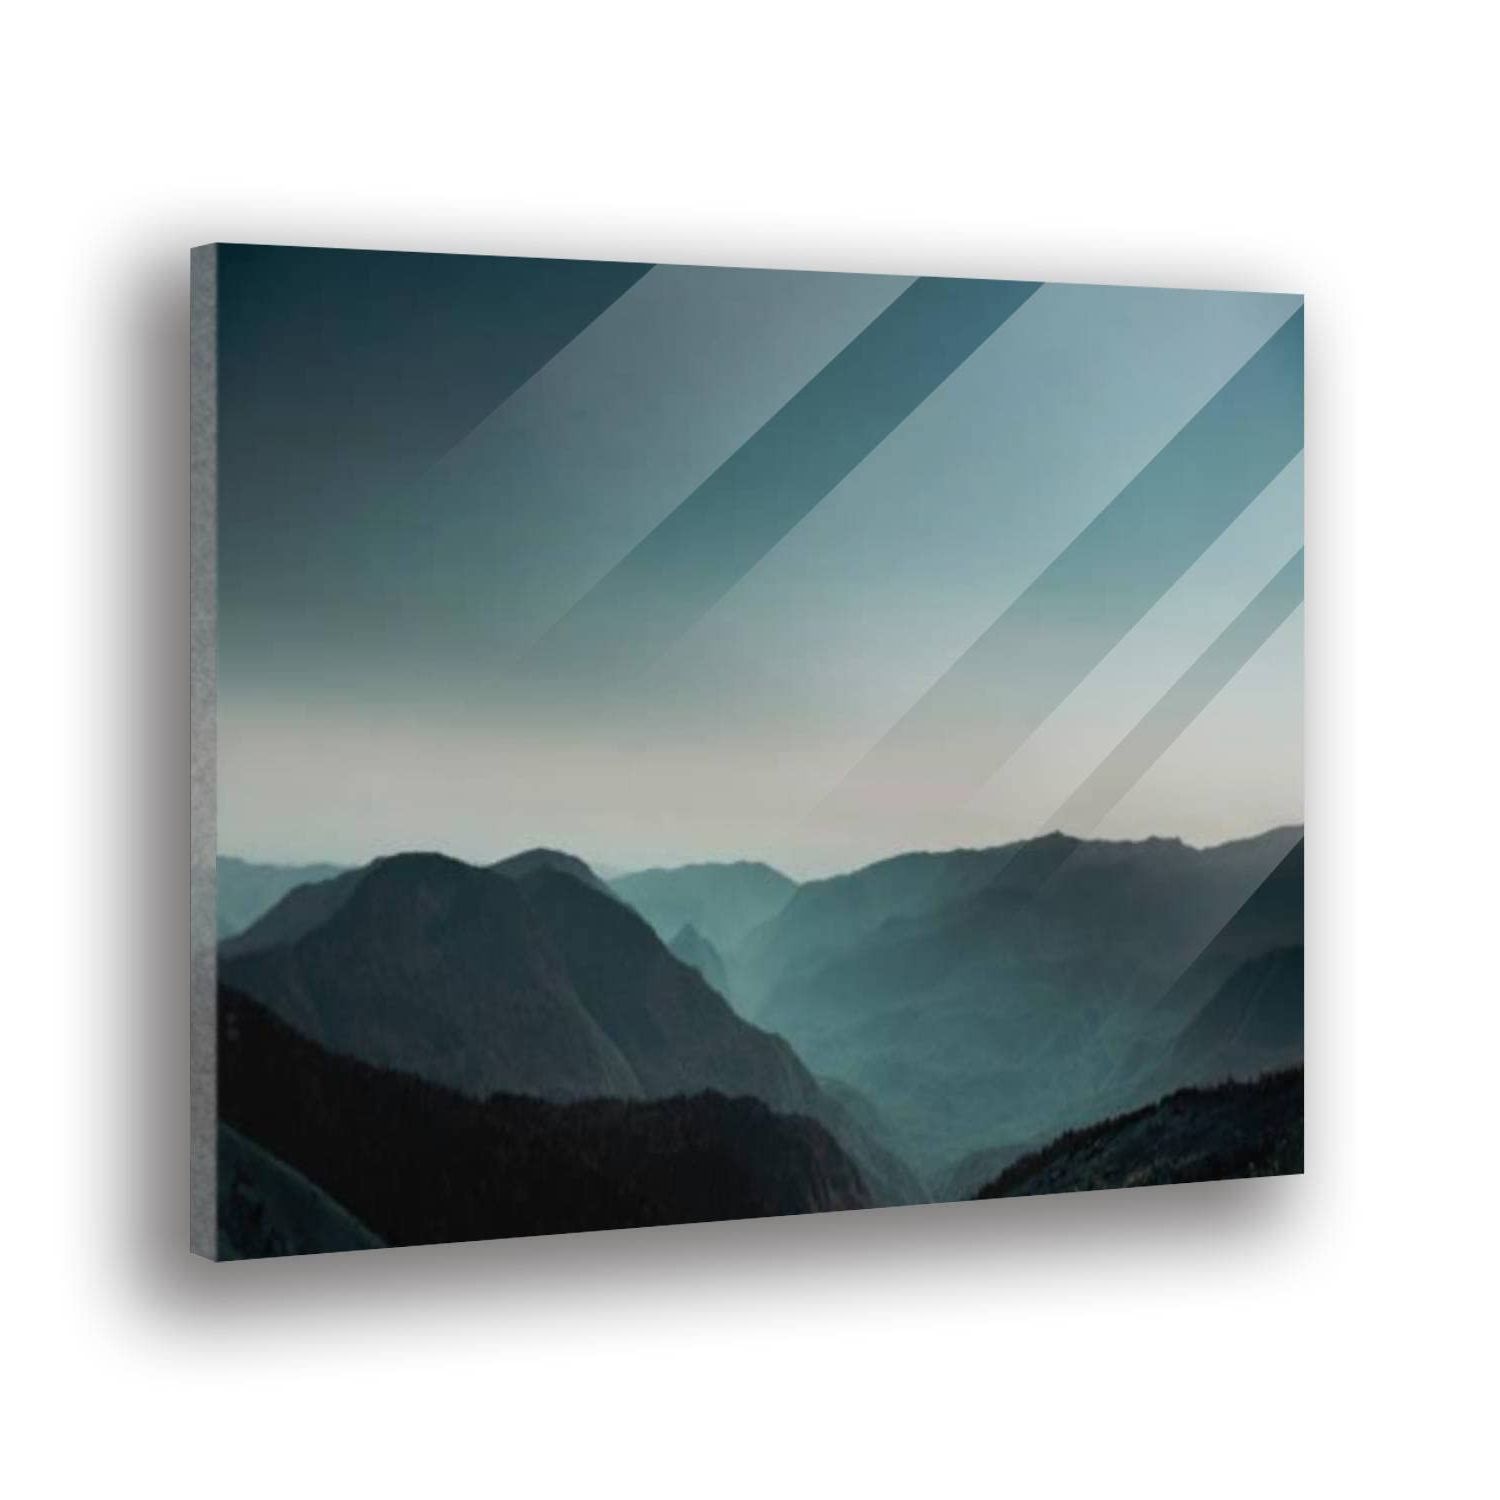 Mountains And Hills Wall Art Inside Most Current Amazon: Tempered Acrylic Glass Wall Art The Outlines Of Mountains And  Hills Through The Fog Rocky Mountain Modern Acrylic Artworks Picture Print  Accent Decor For Living Room Bedroom Office Free Floating : (View 6 of 15)